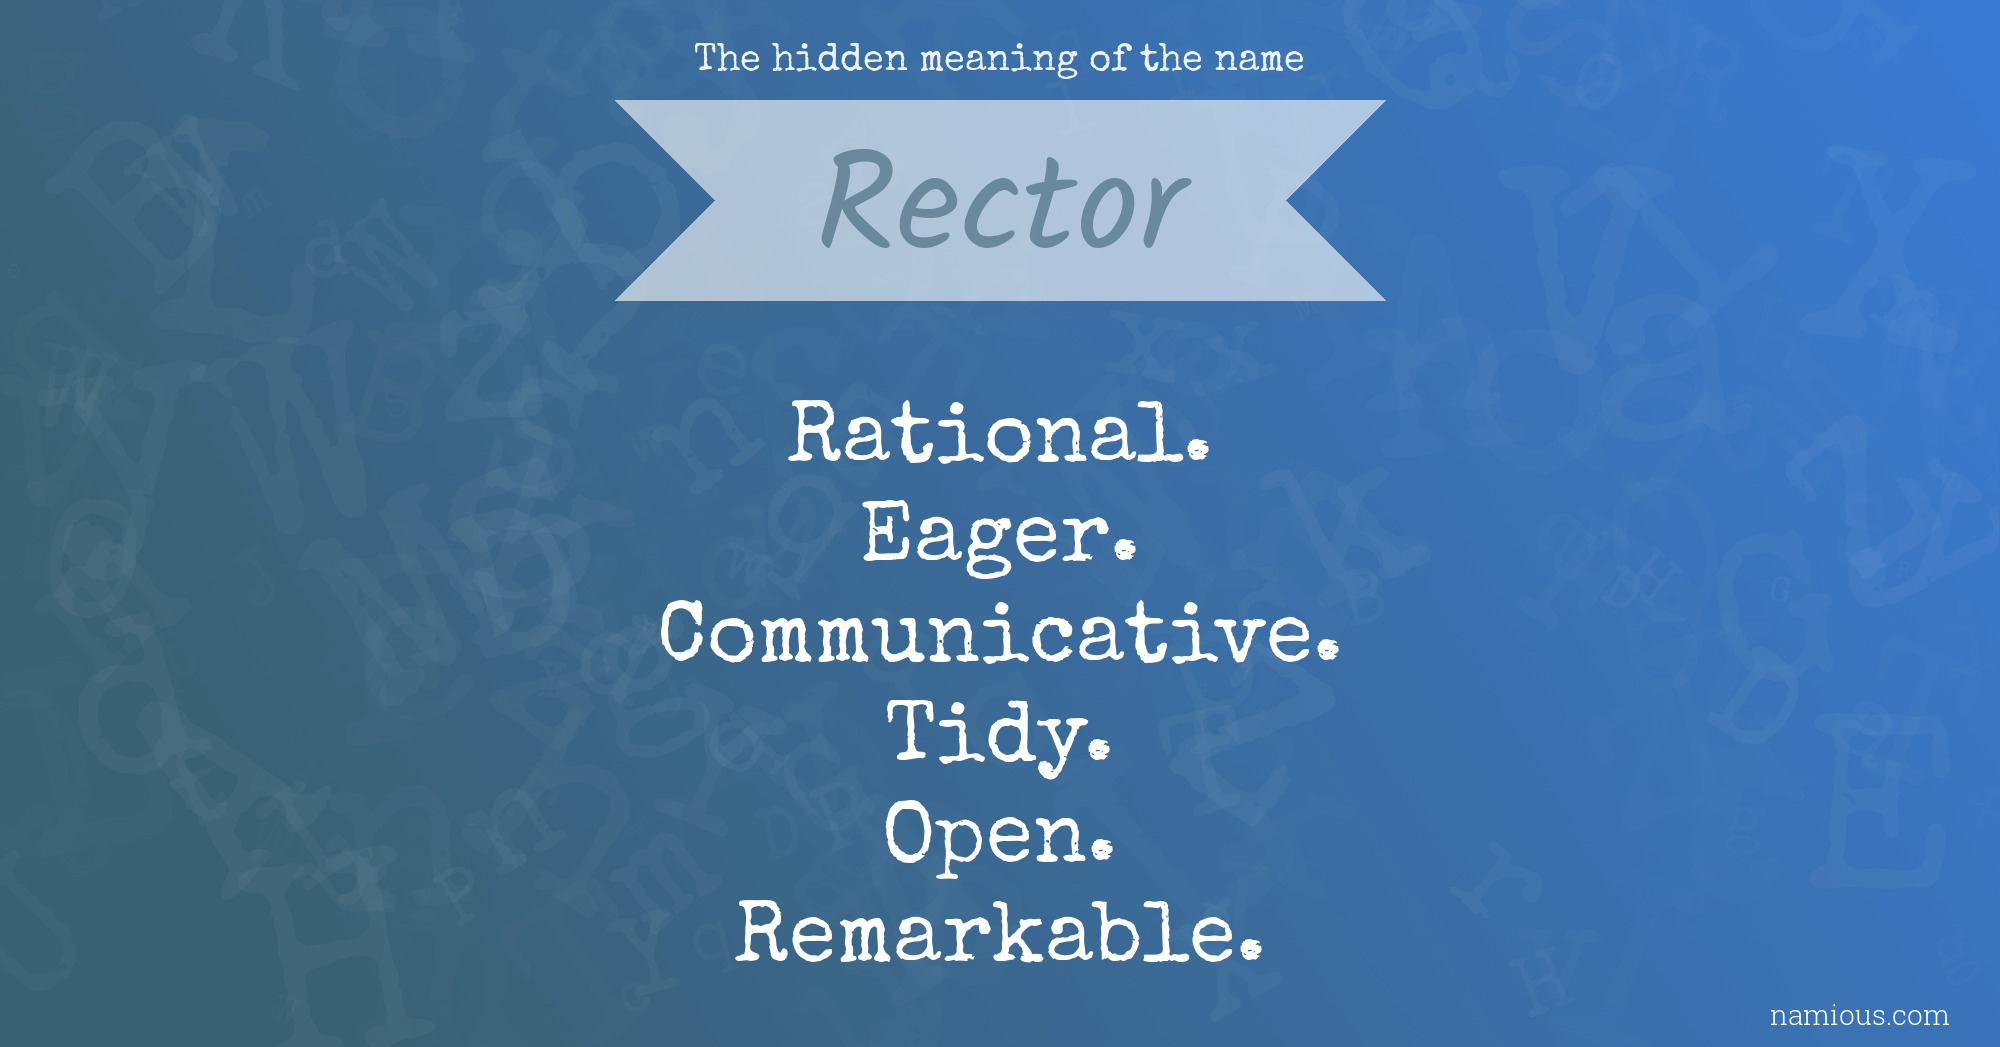 The hidden meaning of the name Rector